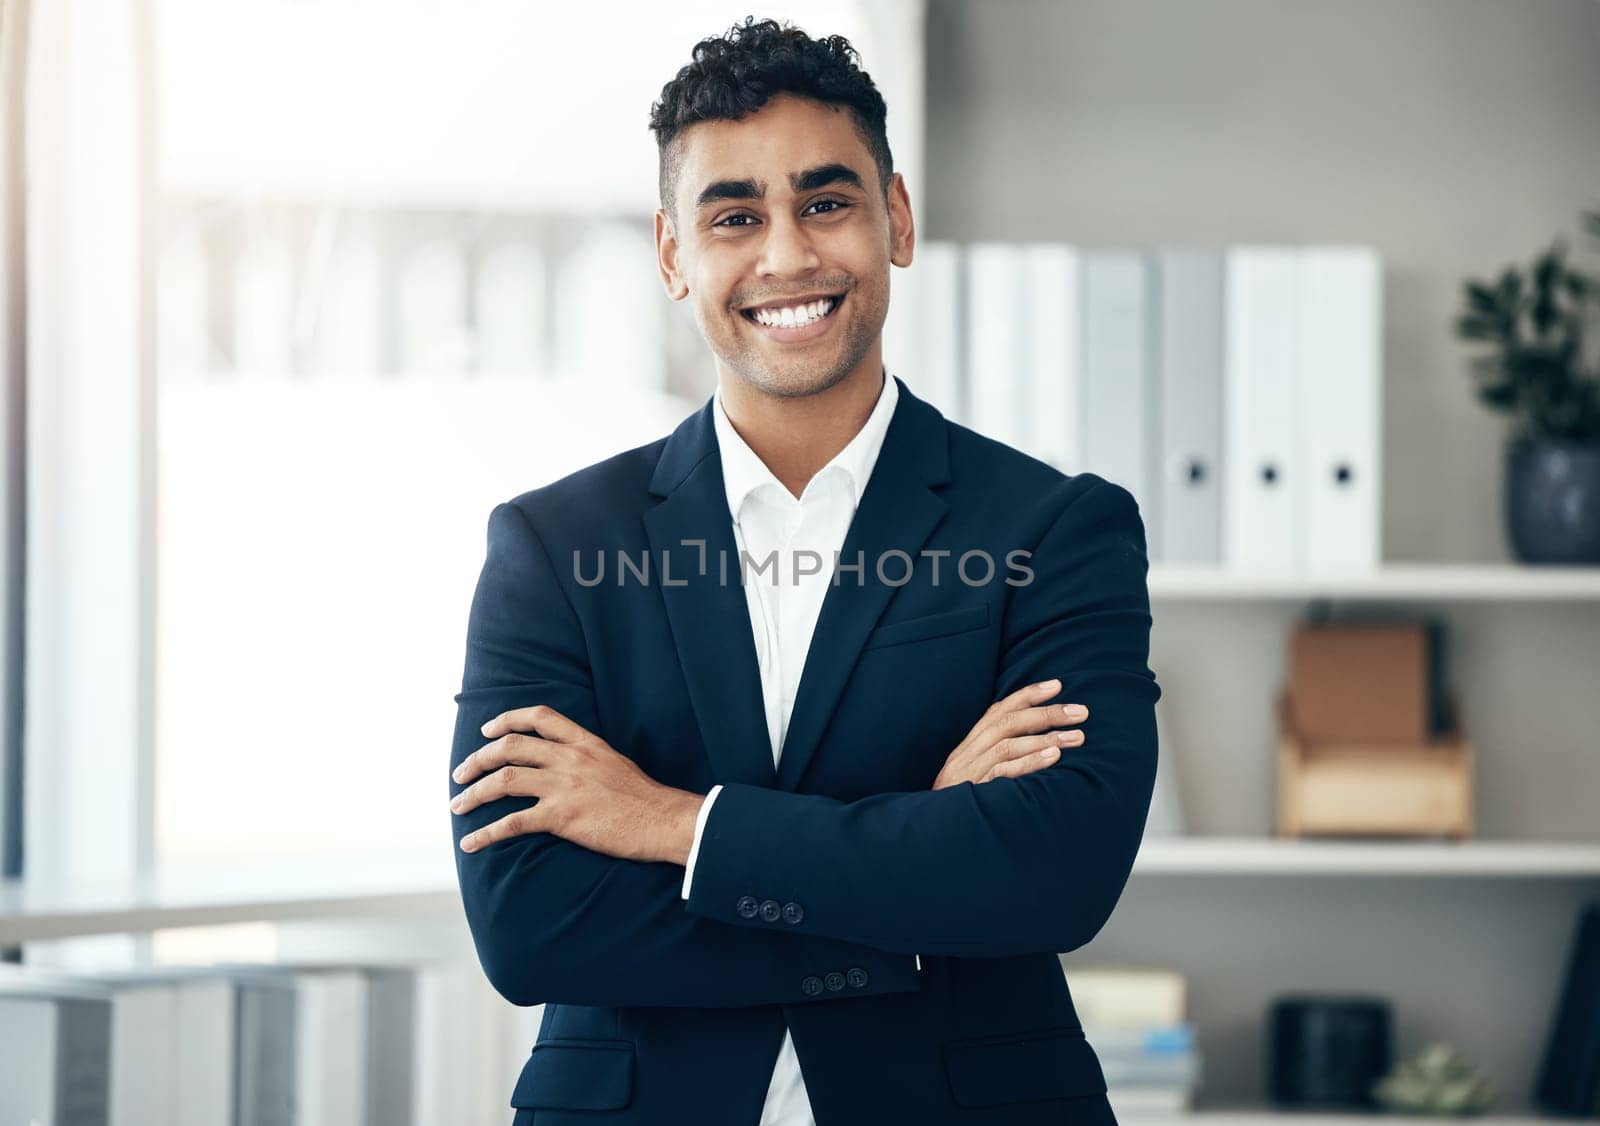 Office, finance and proud business man in company portrait for job motivation, career goals and leadership with a smile. Corporate manager, boss or executive happy with workplace vision or success.